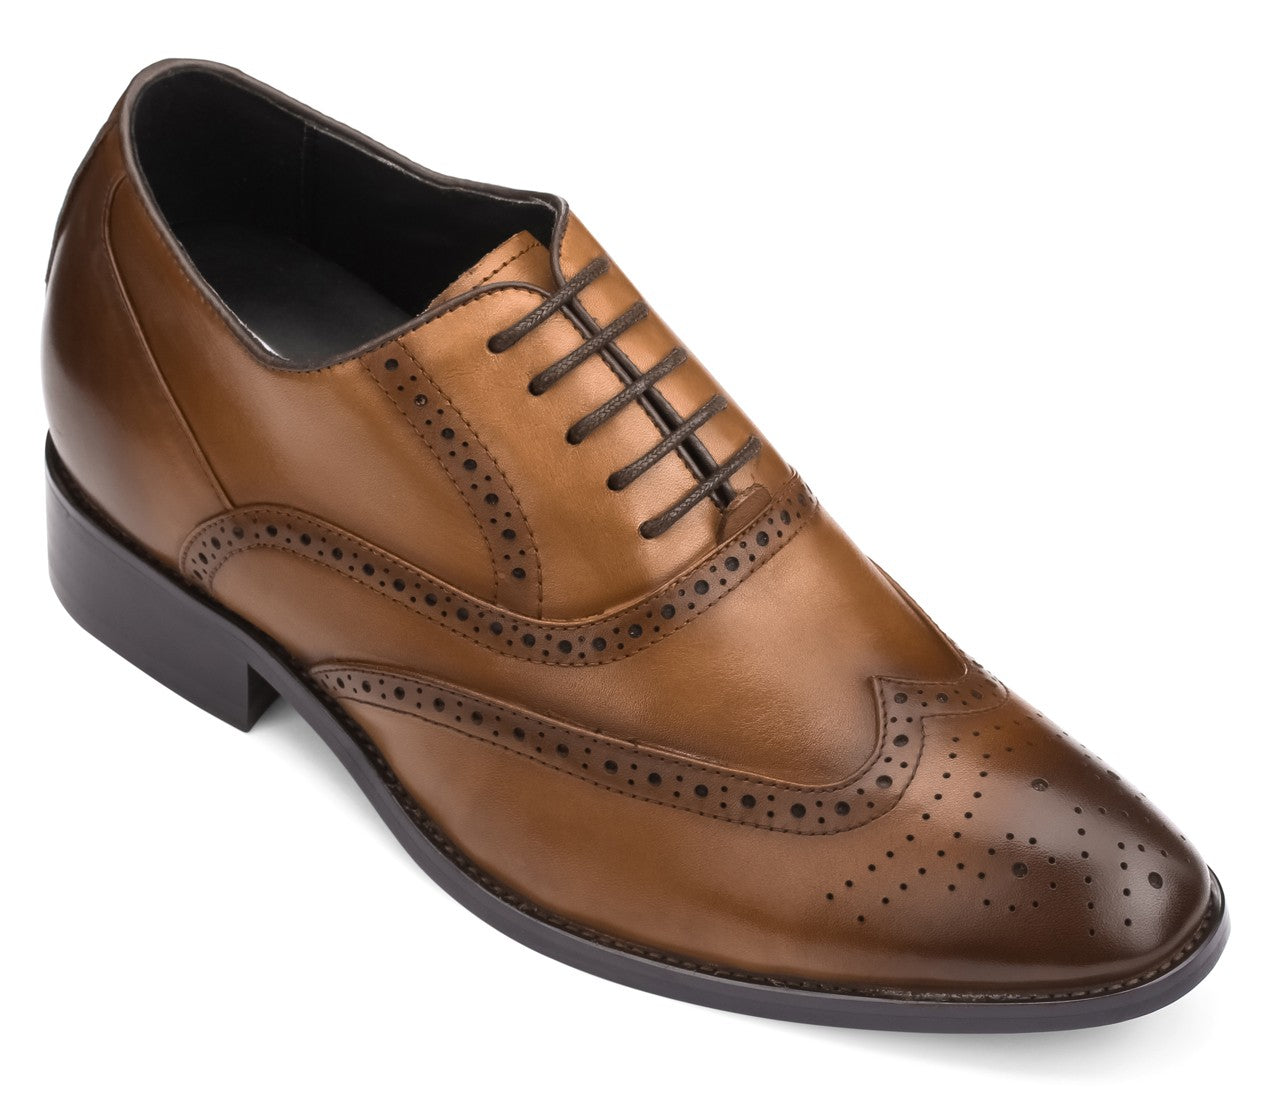 Elevator shoes height increase TOTO Brown Leather Oxford Dress Shoes - Three Inches - A2621C